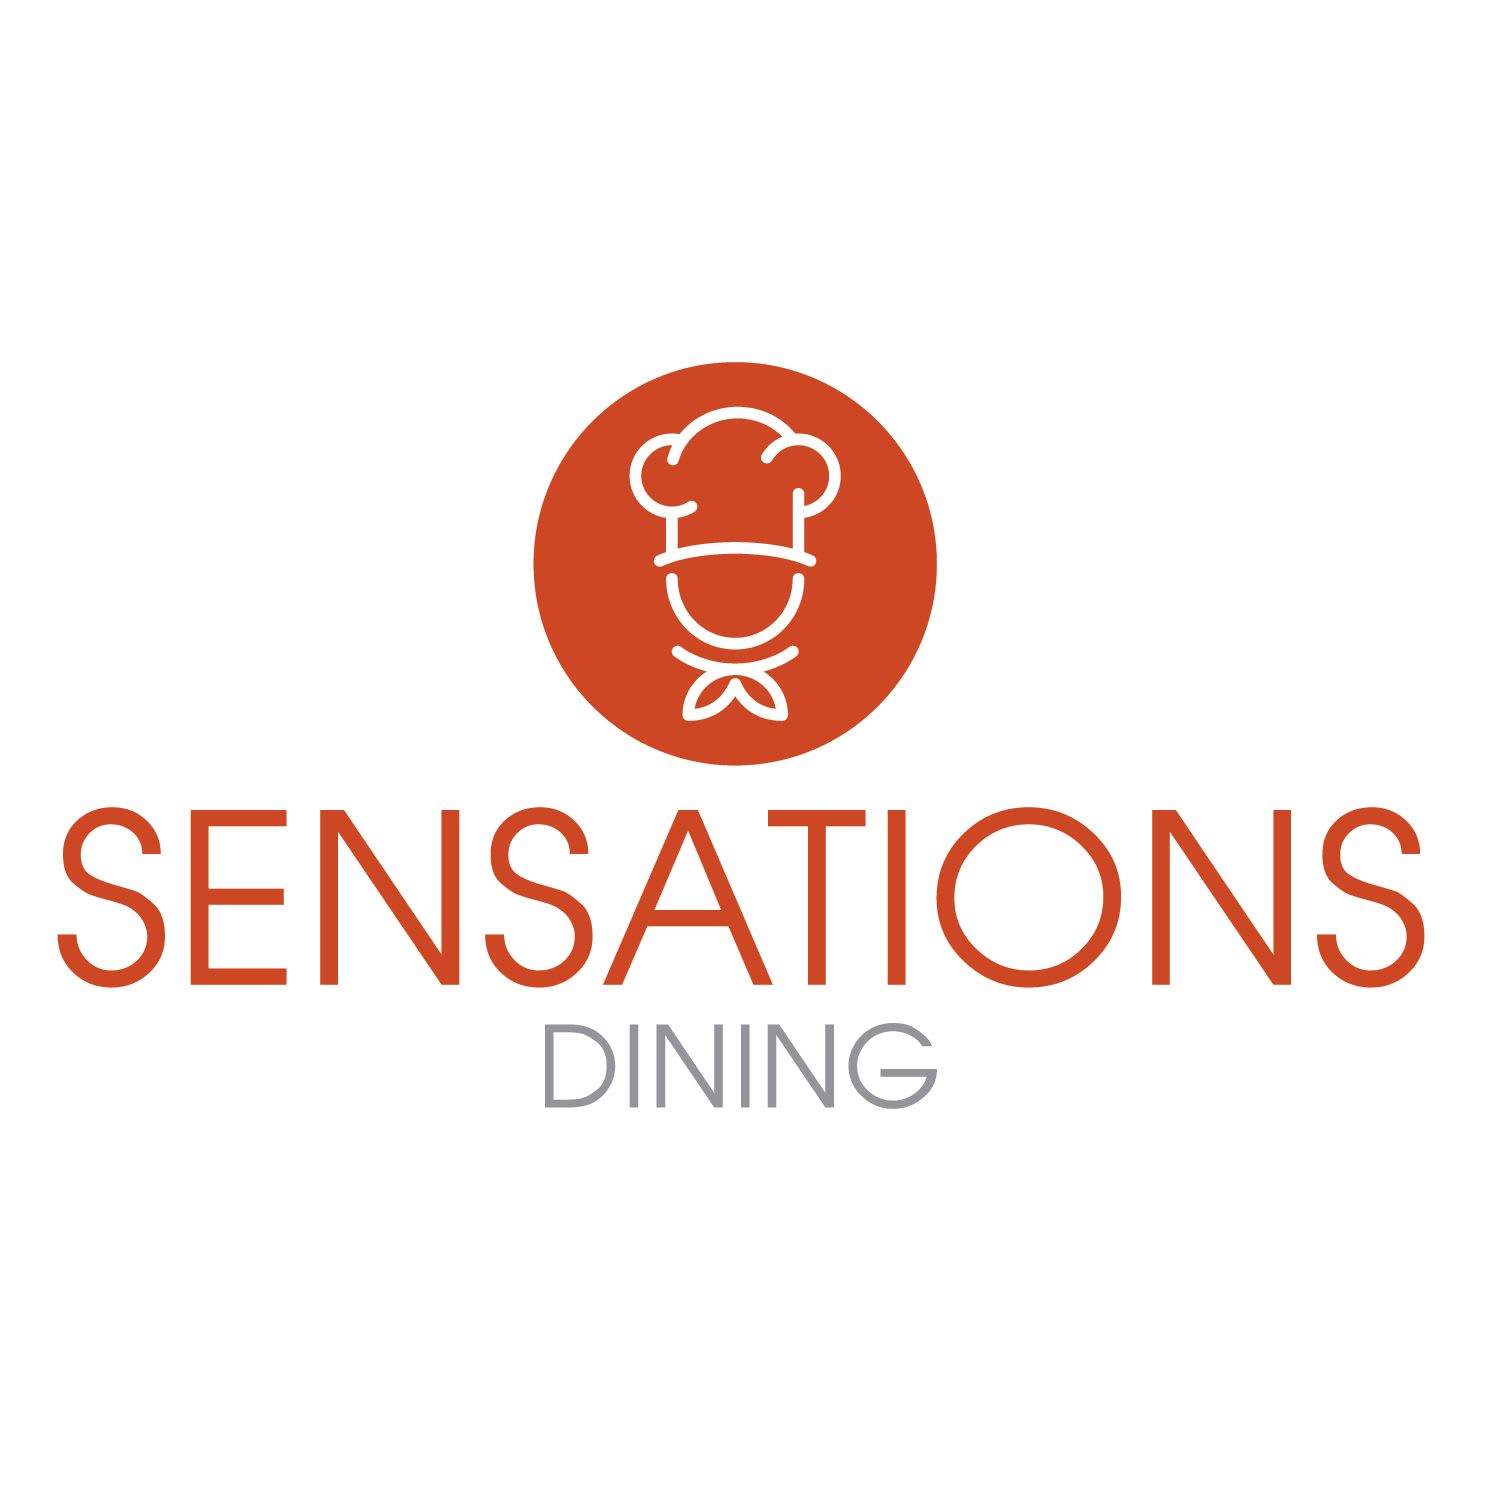 Sensations dining photo card at DELETED - Discovery Commons